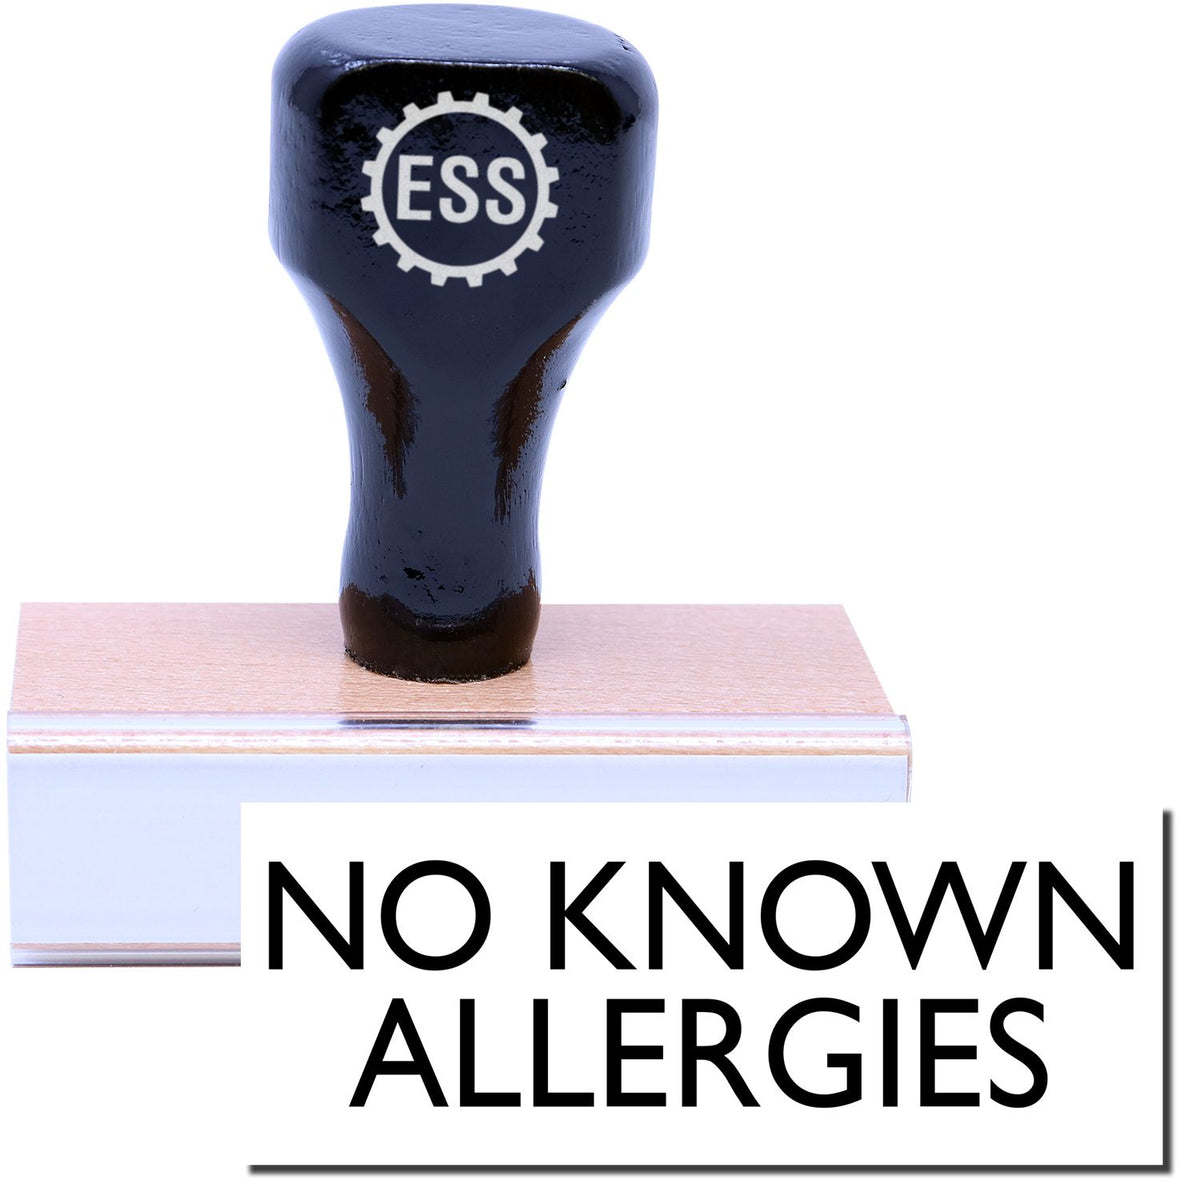 A stock office rubber stamp with a stamped image showing how the text &quot;NO KNOWN ALLERGIES&quot; is displayed after stamping.